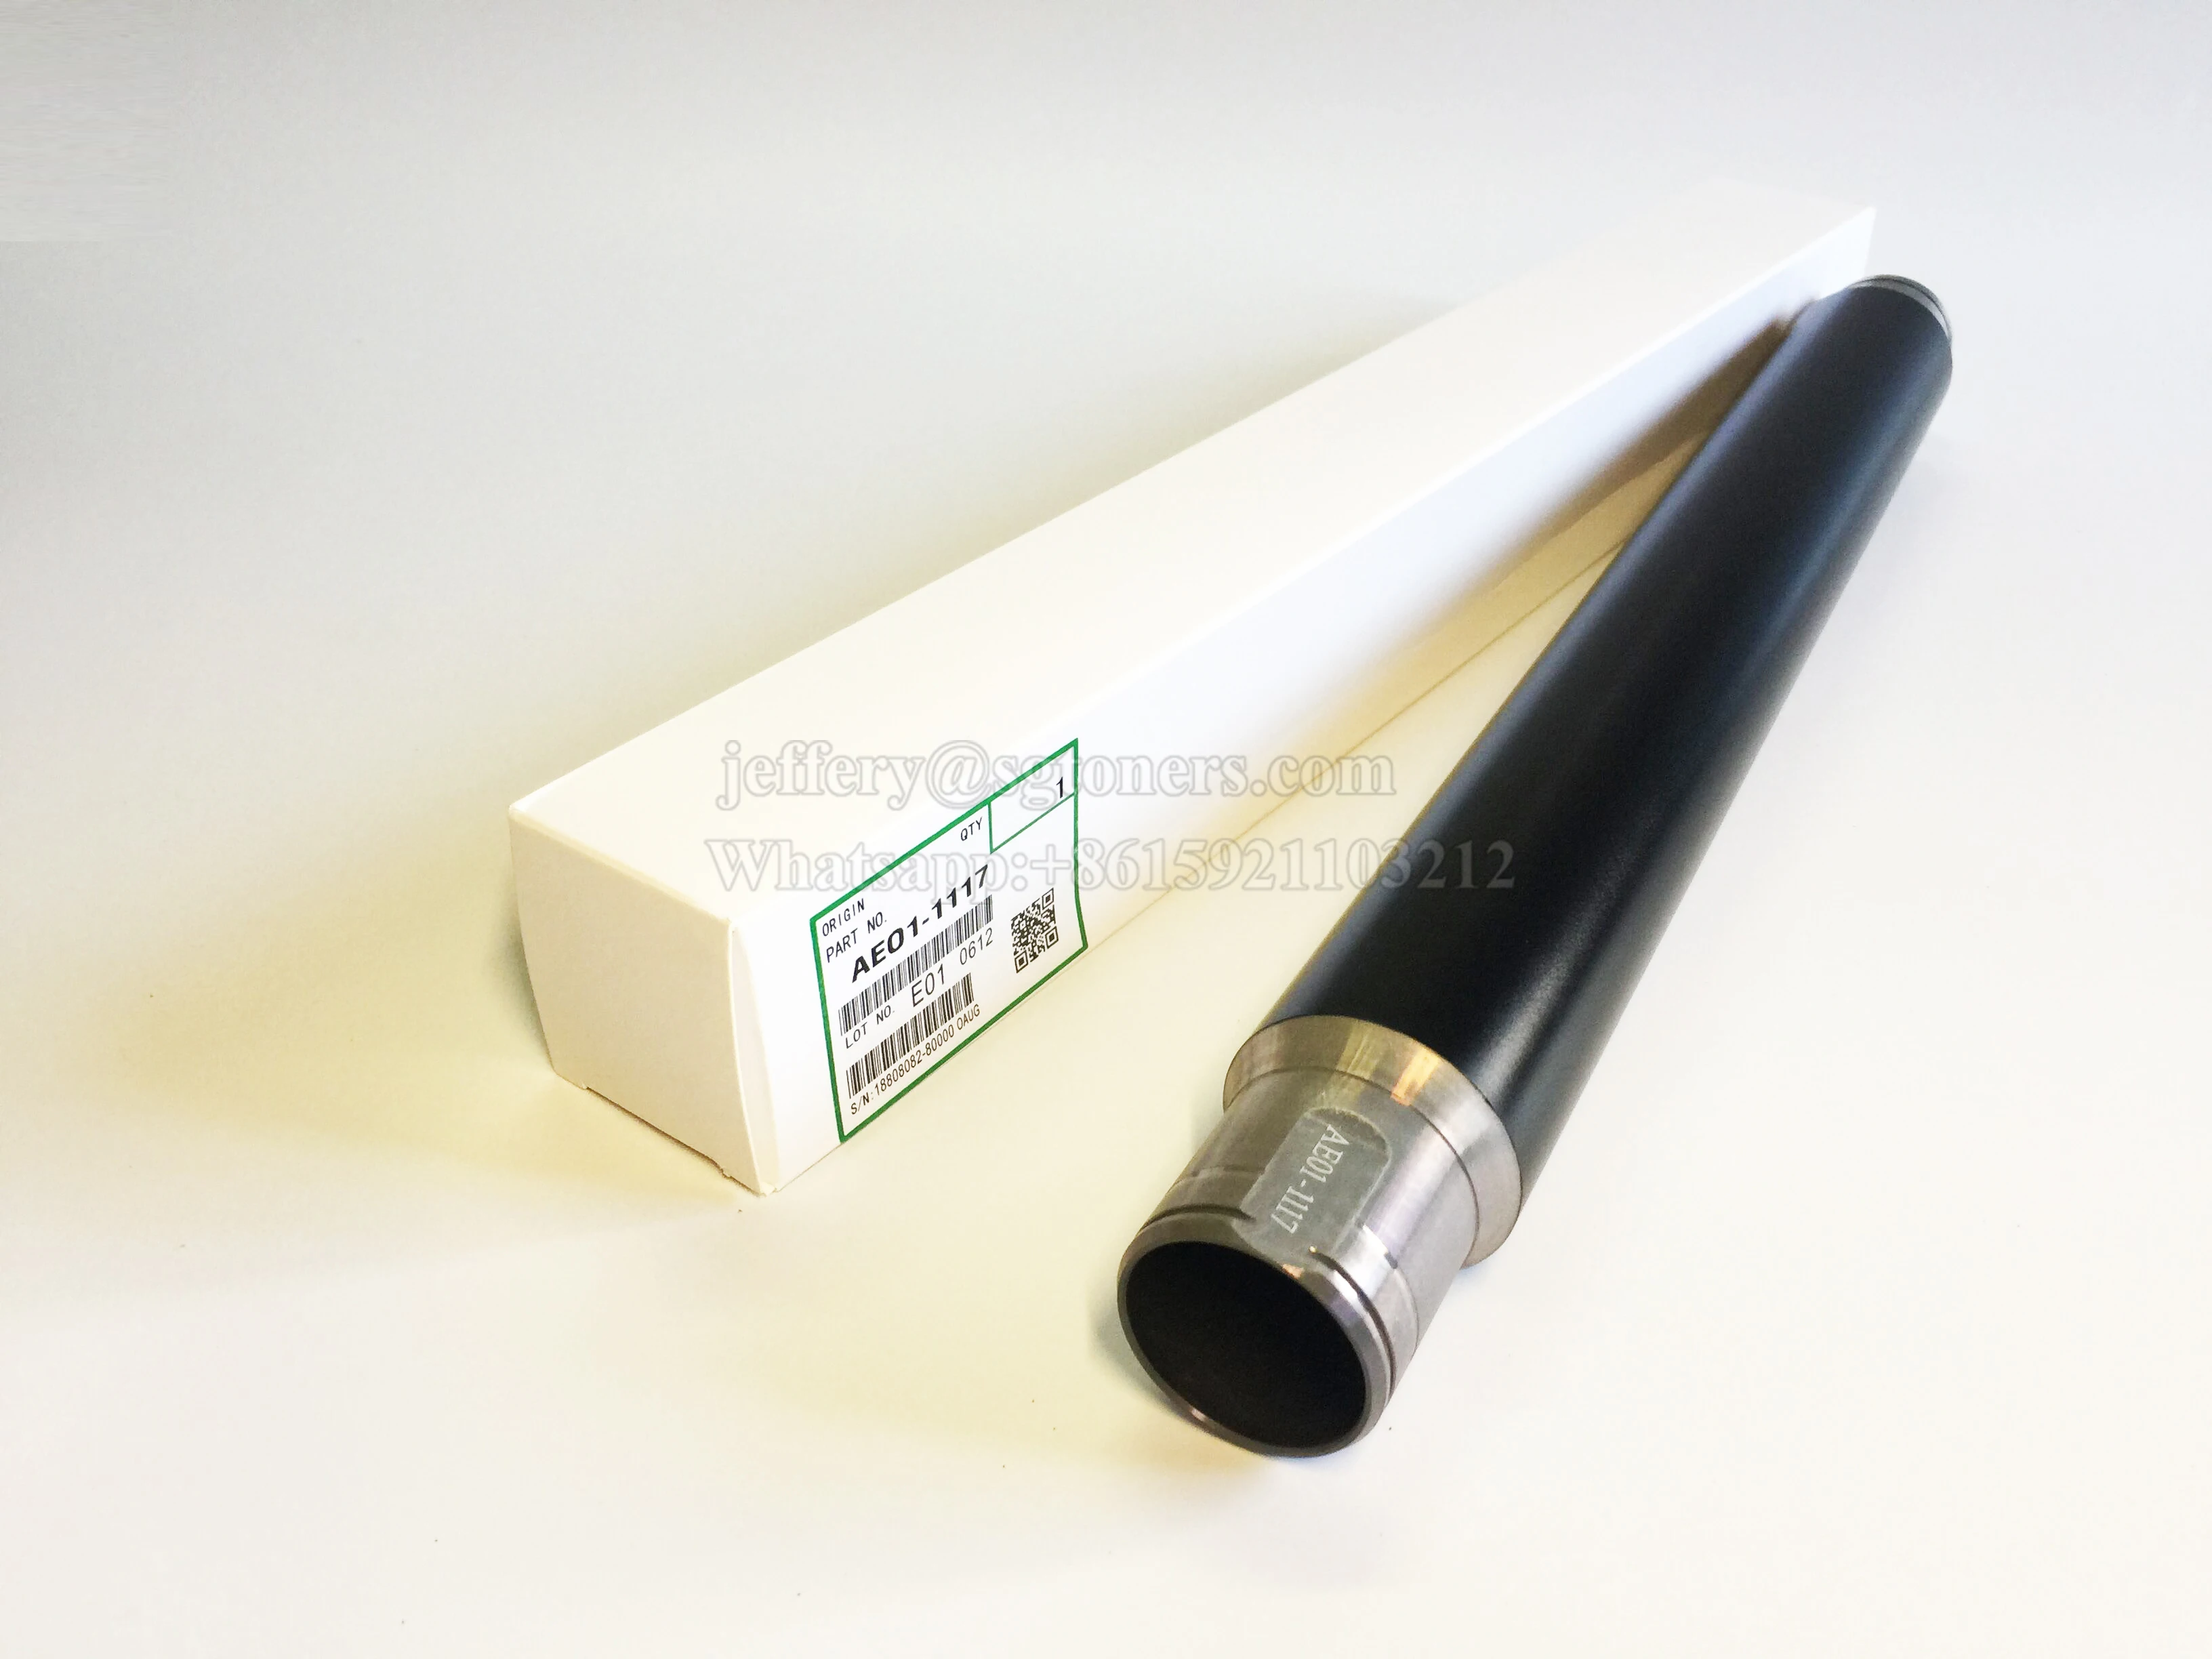 Details about   Genuine Ricoh AE01-0133 Fusing Roller NEW FREE FAST SHIP 